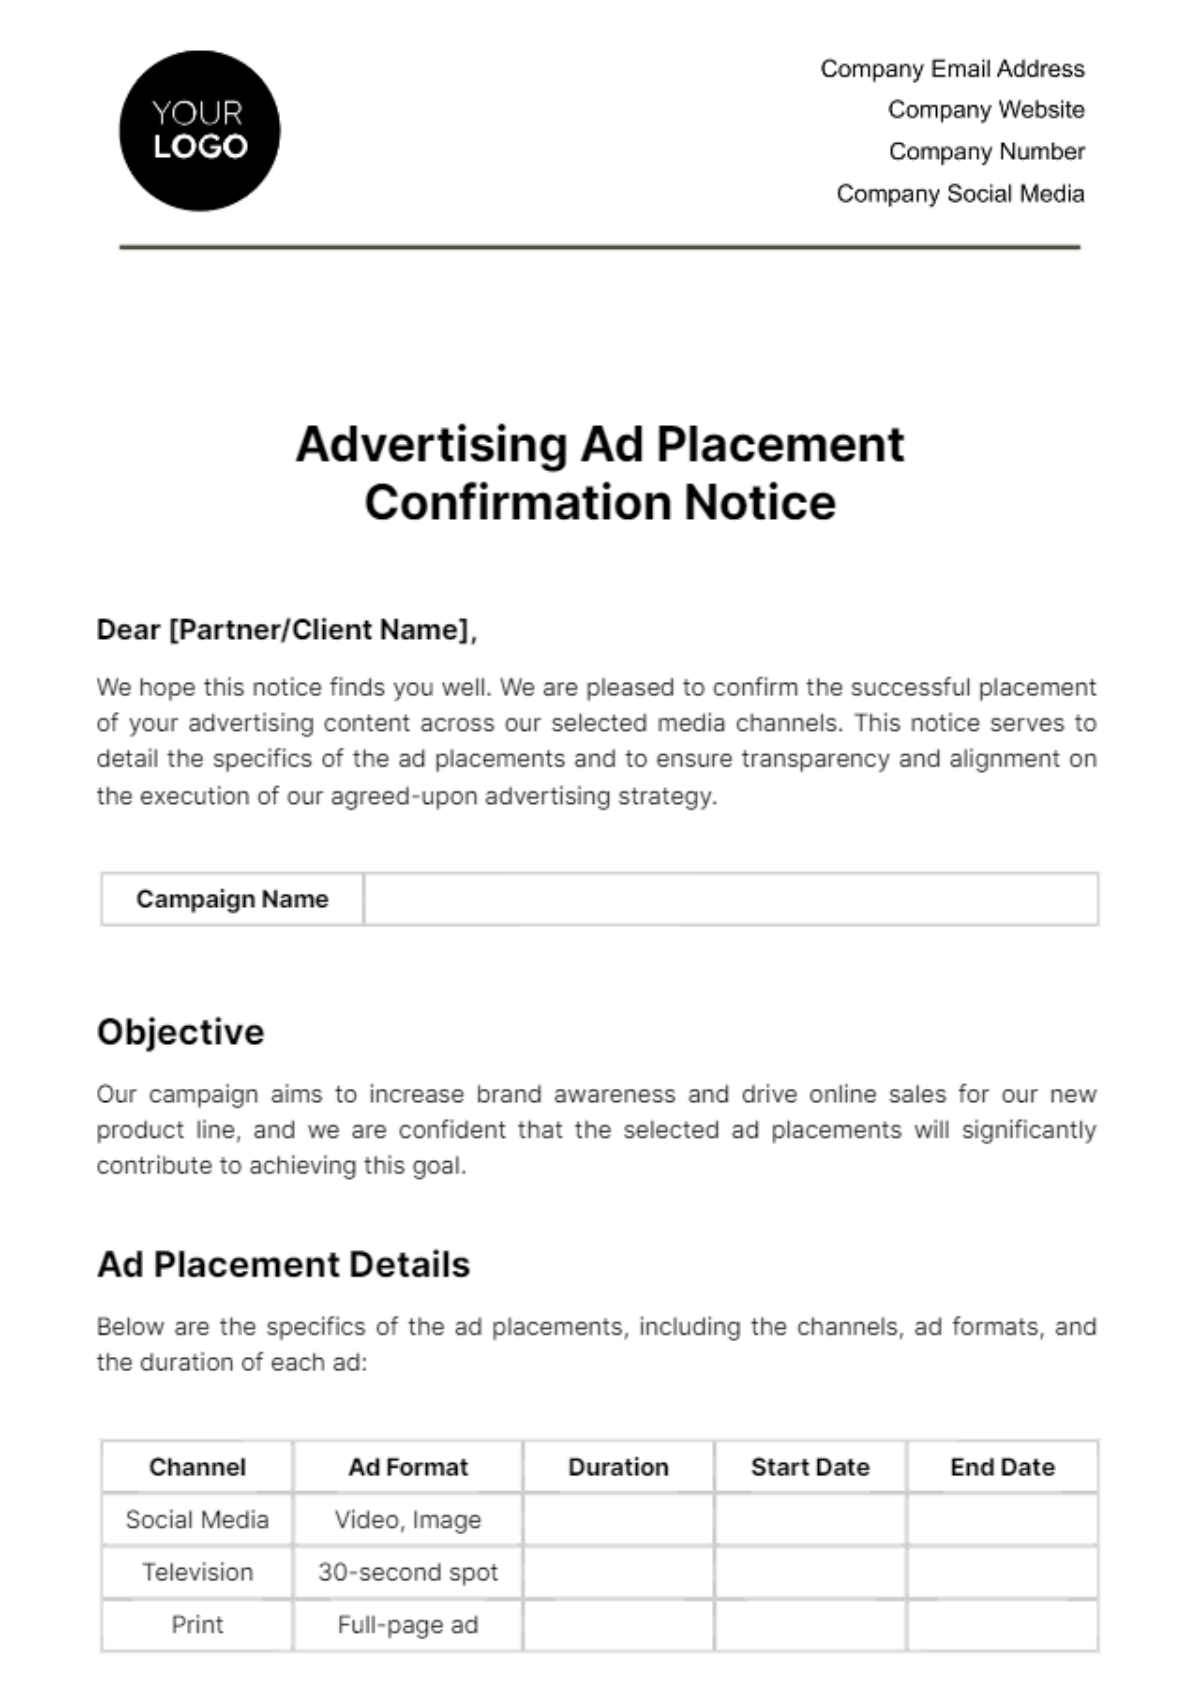 Free Advertising Ad Placement Confirmation Notice Template